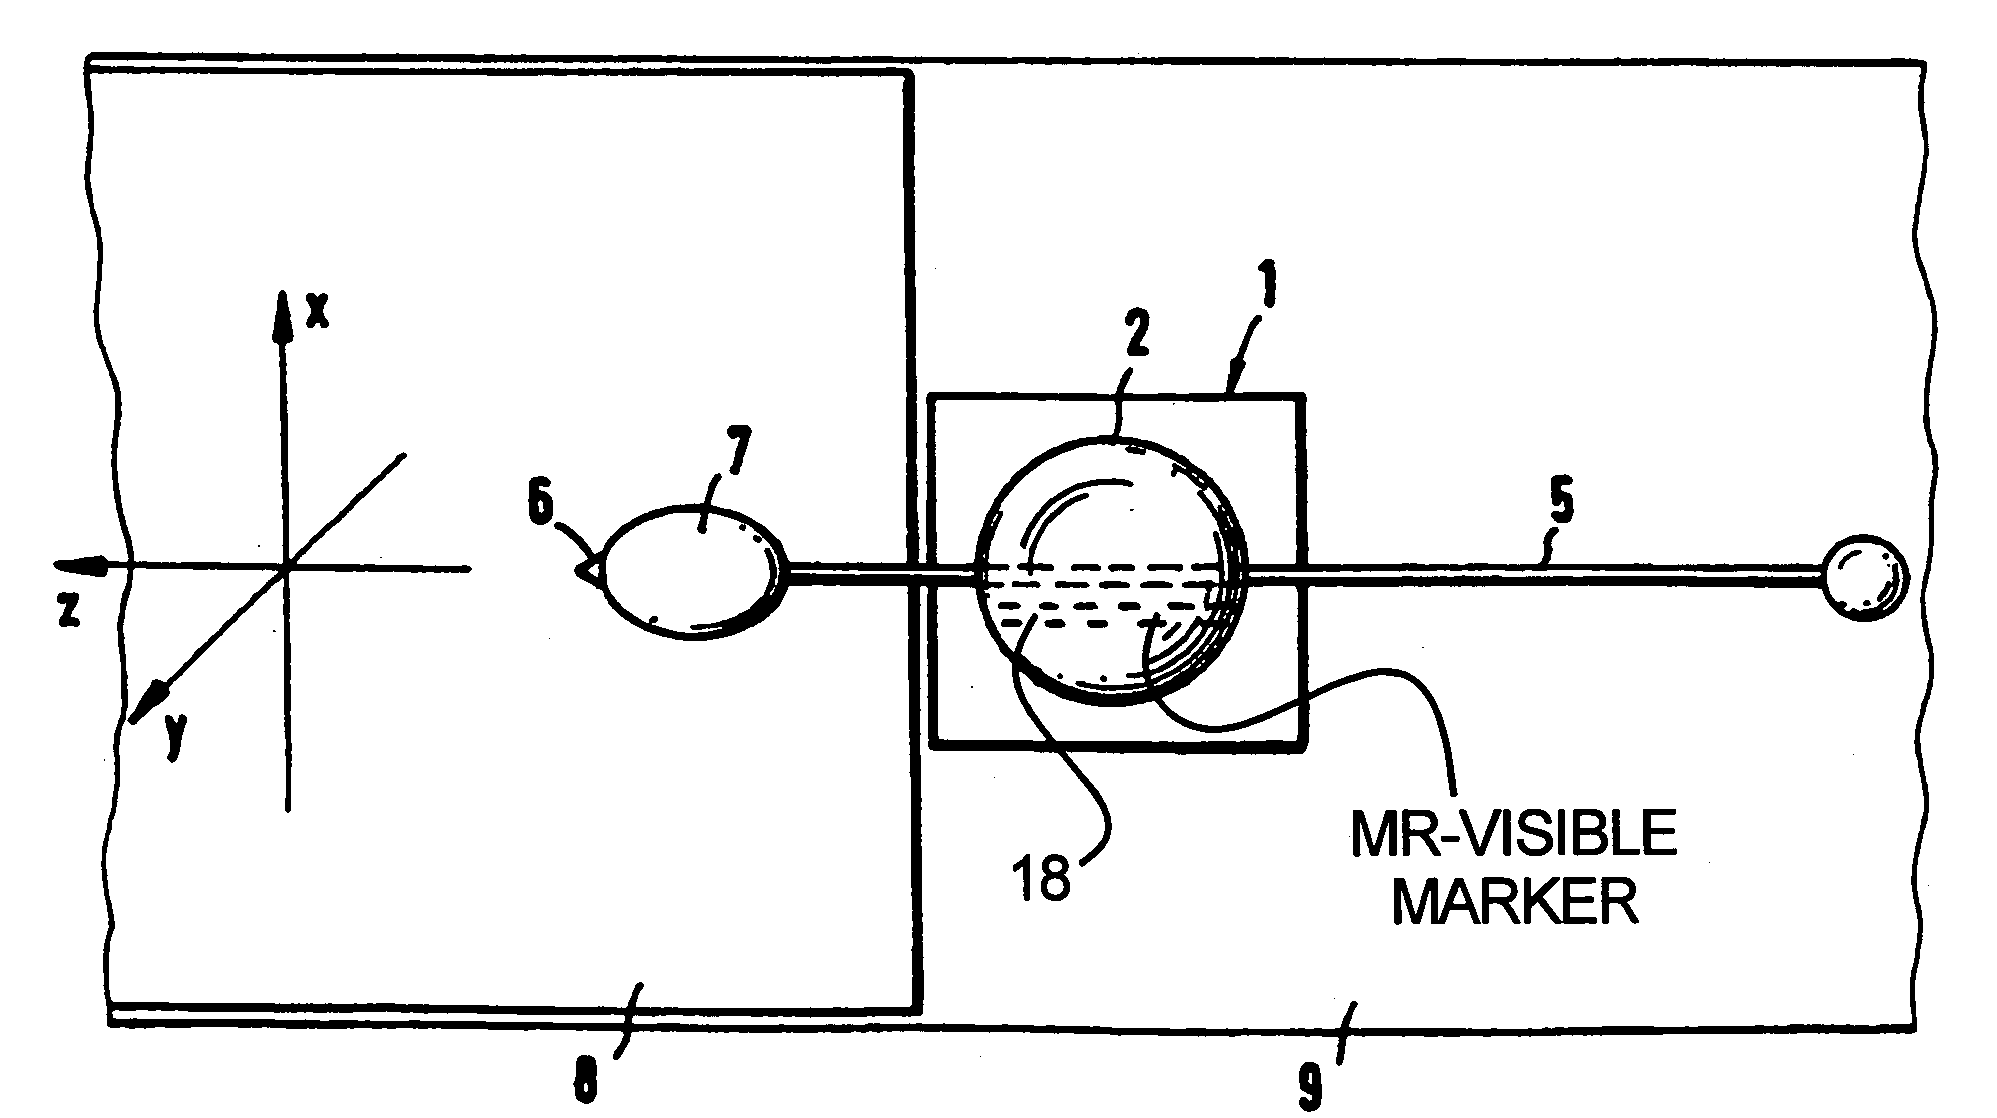 Apparatus for endorectal prostate biopsy